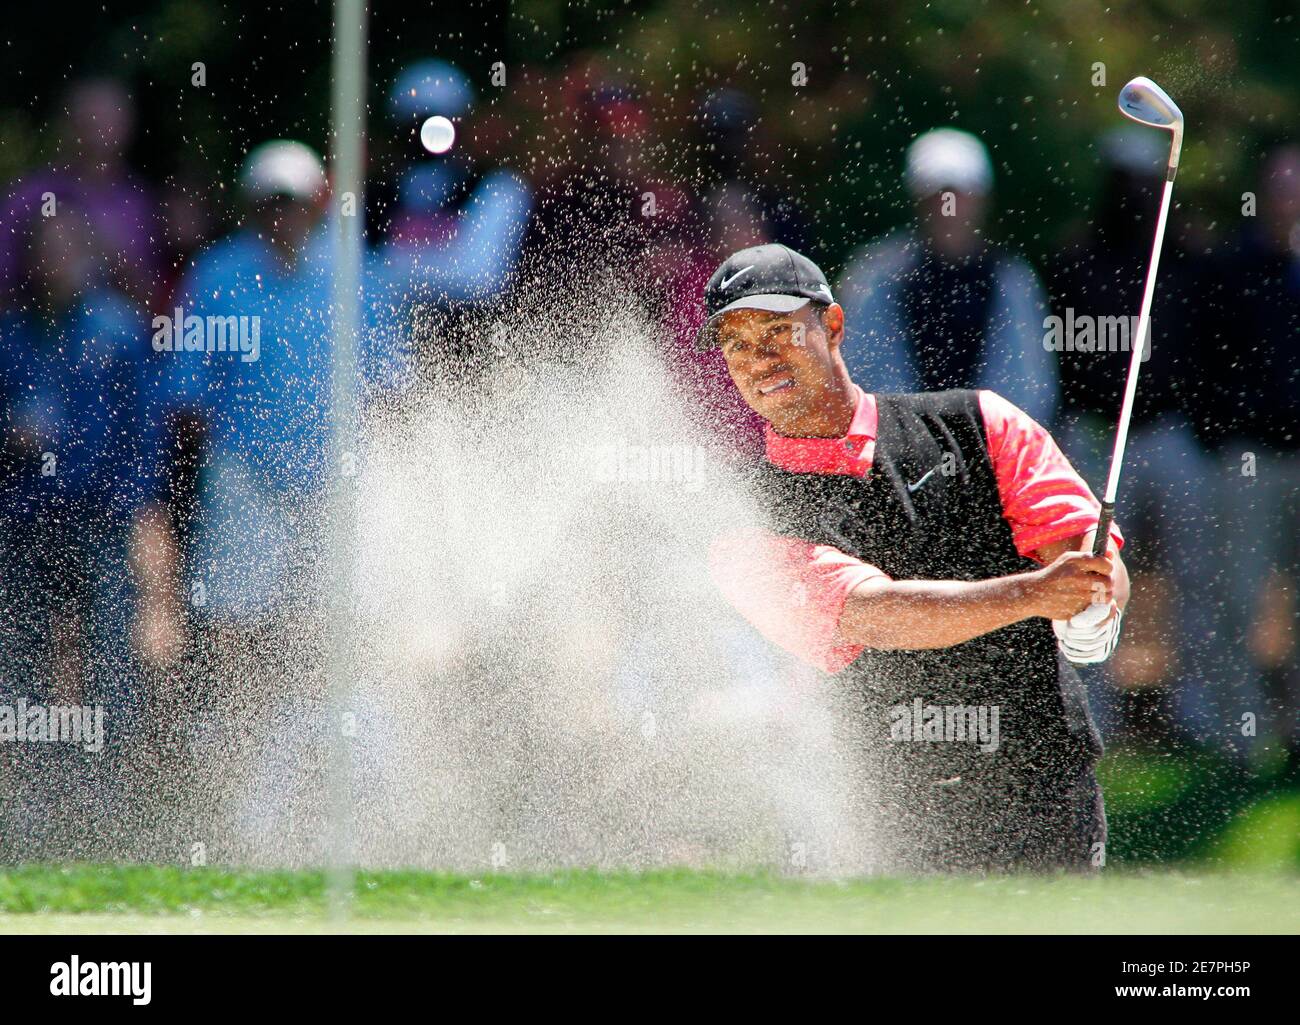 Tiger Woods of the U.S. hits out of a sand trap on the seventh green during the final round at The Players Championship golf tournament in Ponte Vedra Beach, Florida on March 26, 2006. REUTERS/Rick Fowler Stock Photo